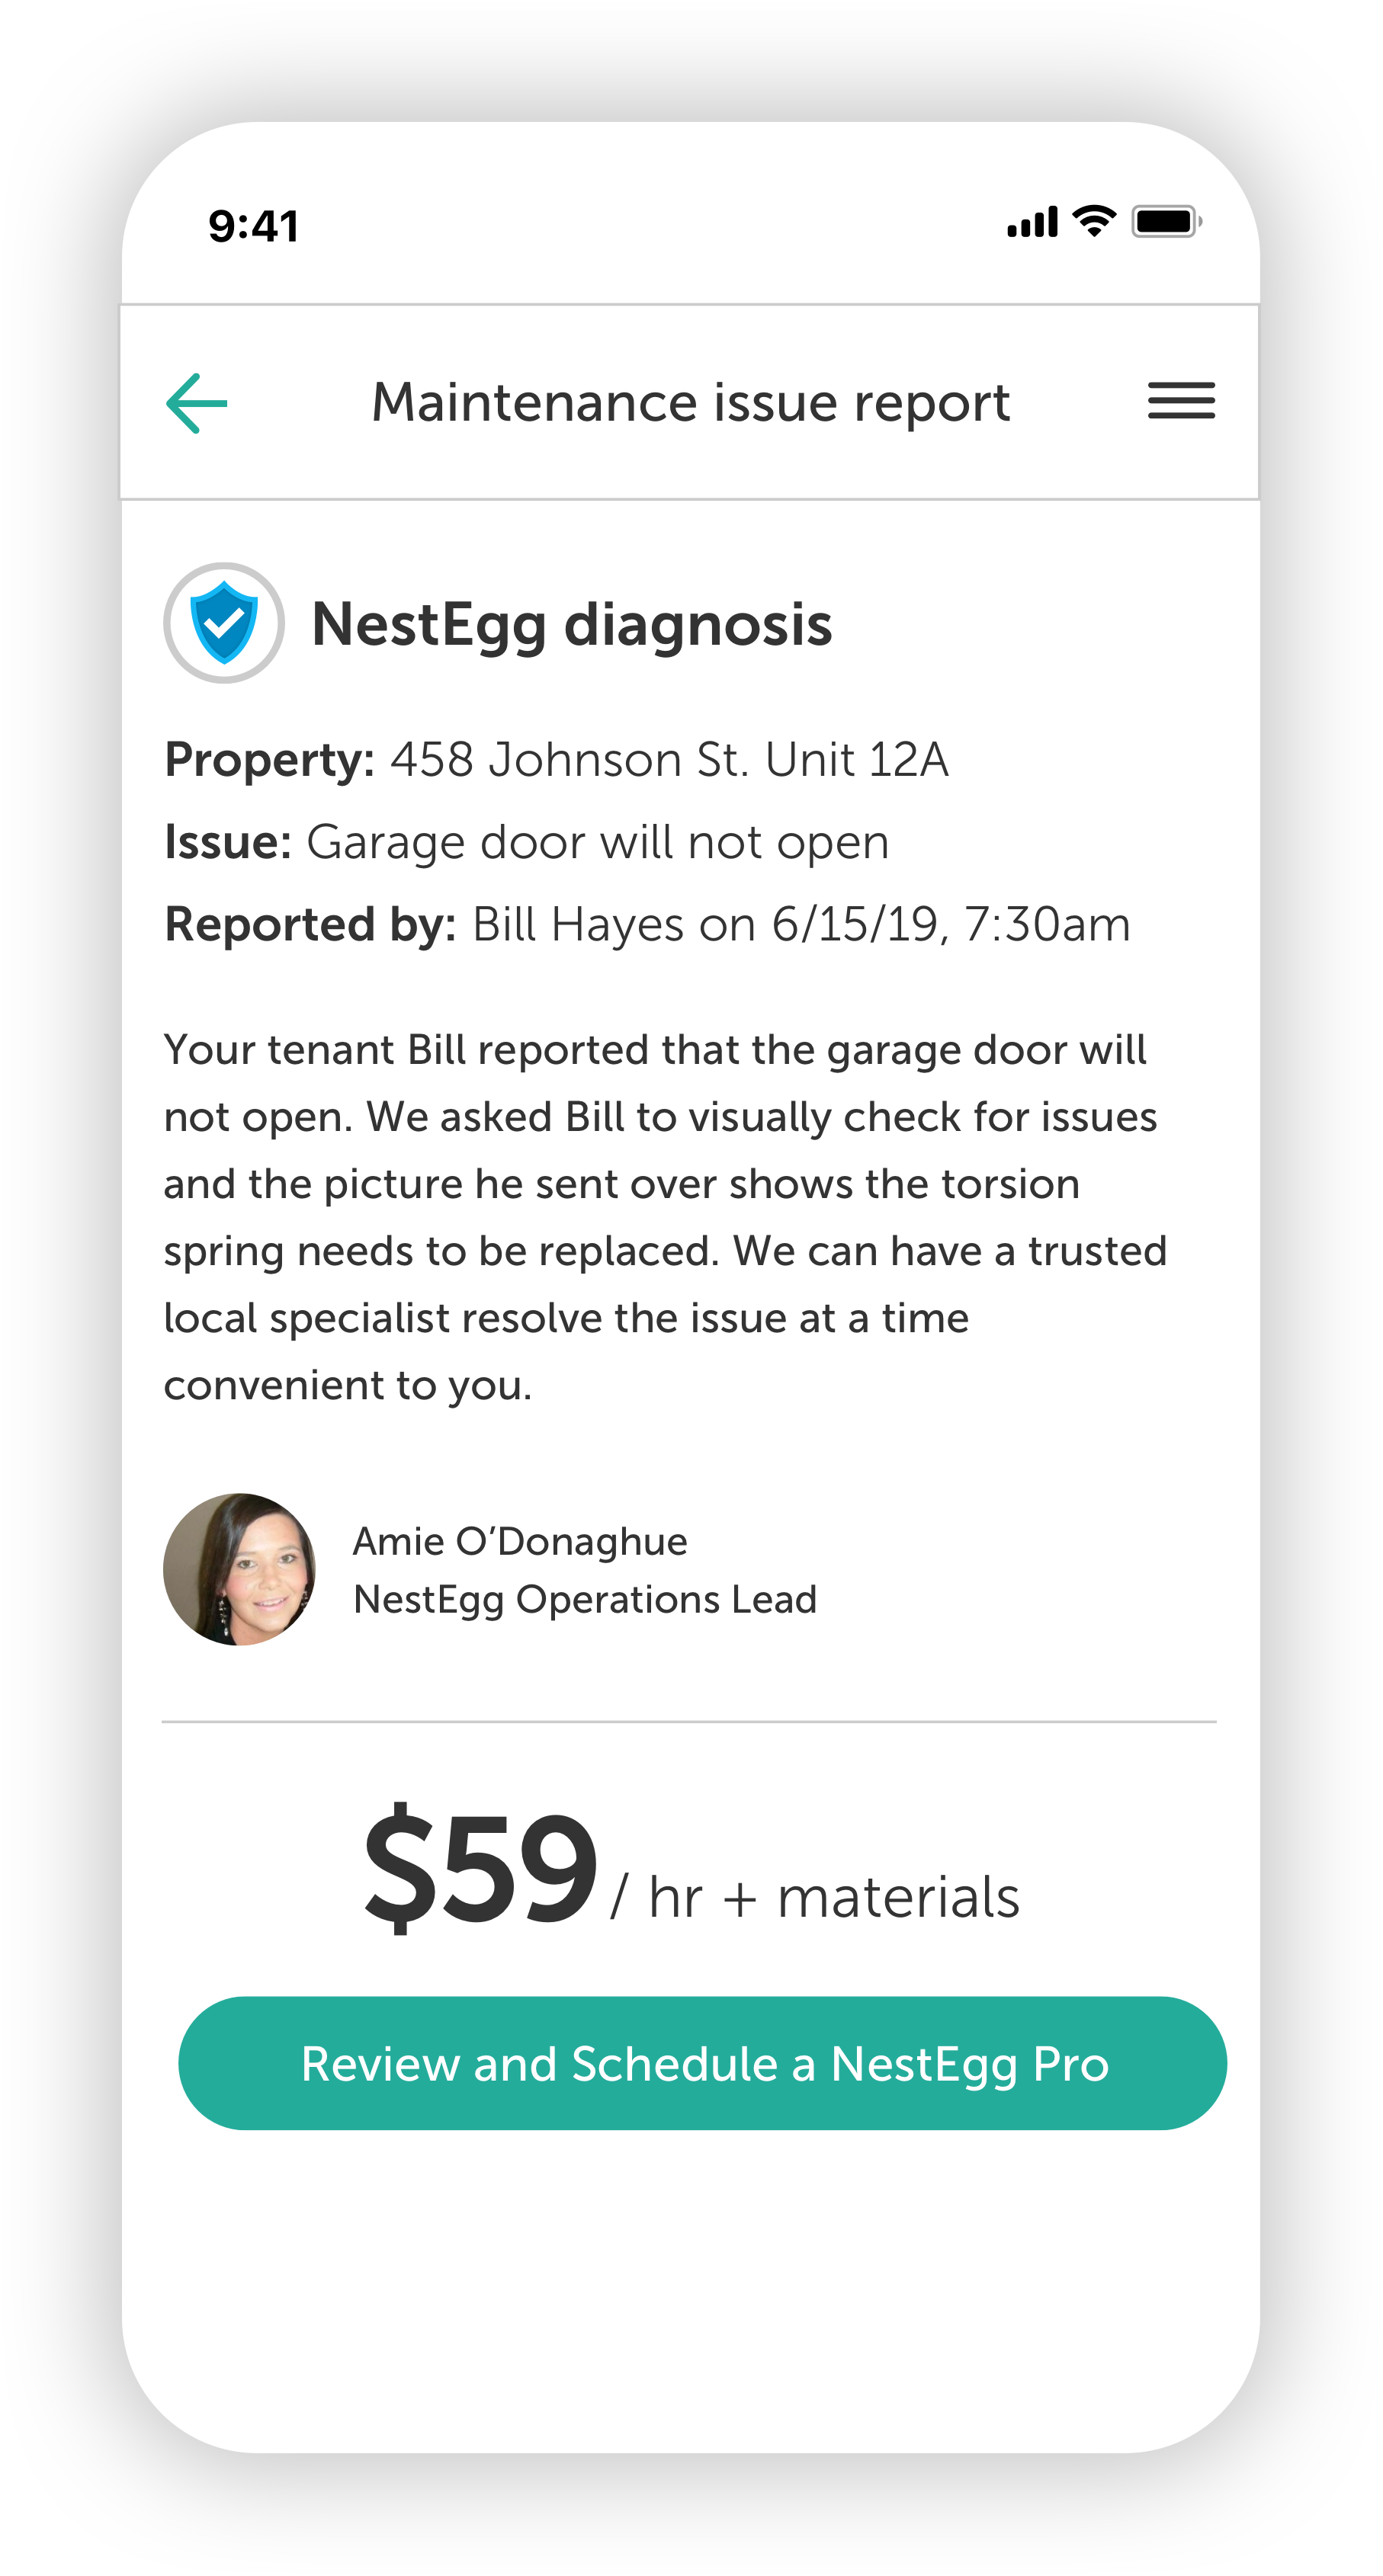 NestEgg diagnoses the reported issue and gives you a quote to get it fixed